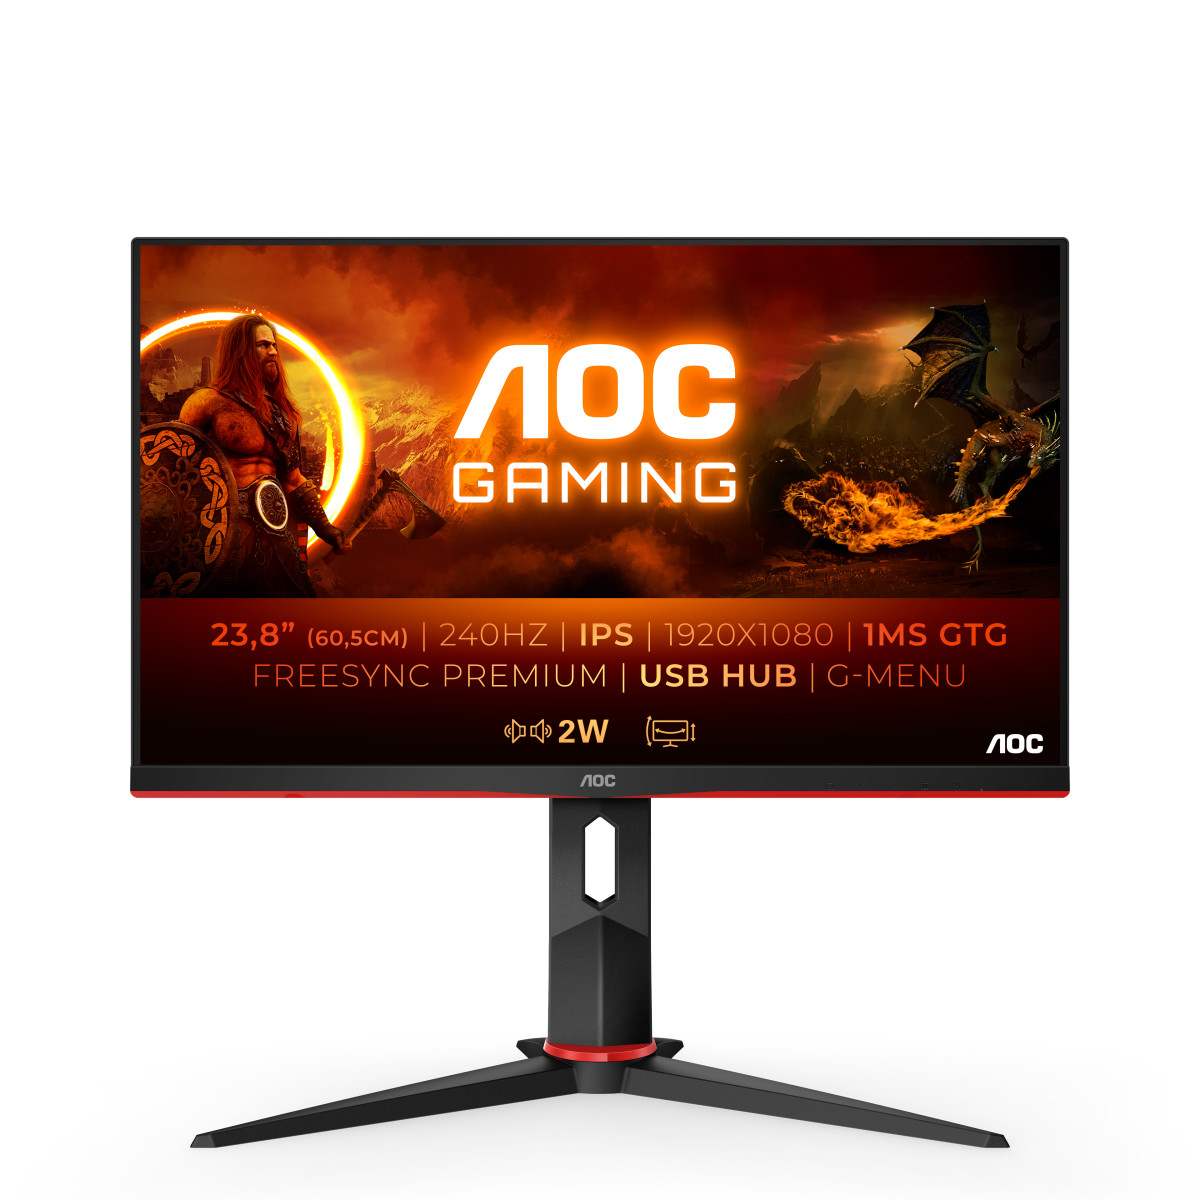 Looking for a Gaming Monitor with a 240Hz refresh rate, on a budget? 💷

Check out this AOC 23.8' 24G2ZU Gaming Monitor for just £254.99 via the link below:
loom.ly/91hqAEI

#GamingMonitors #240Hz #AOC #AOCMonitors